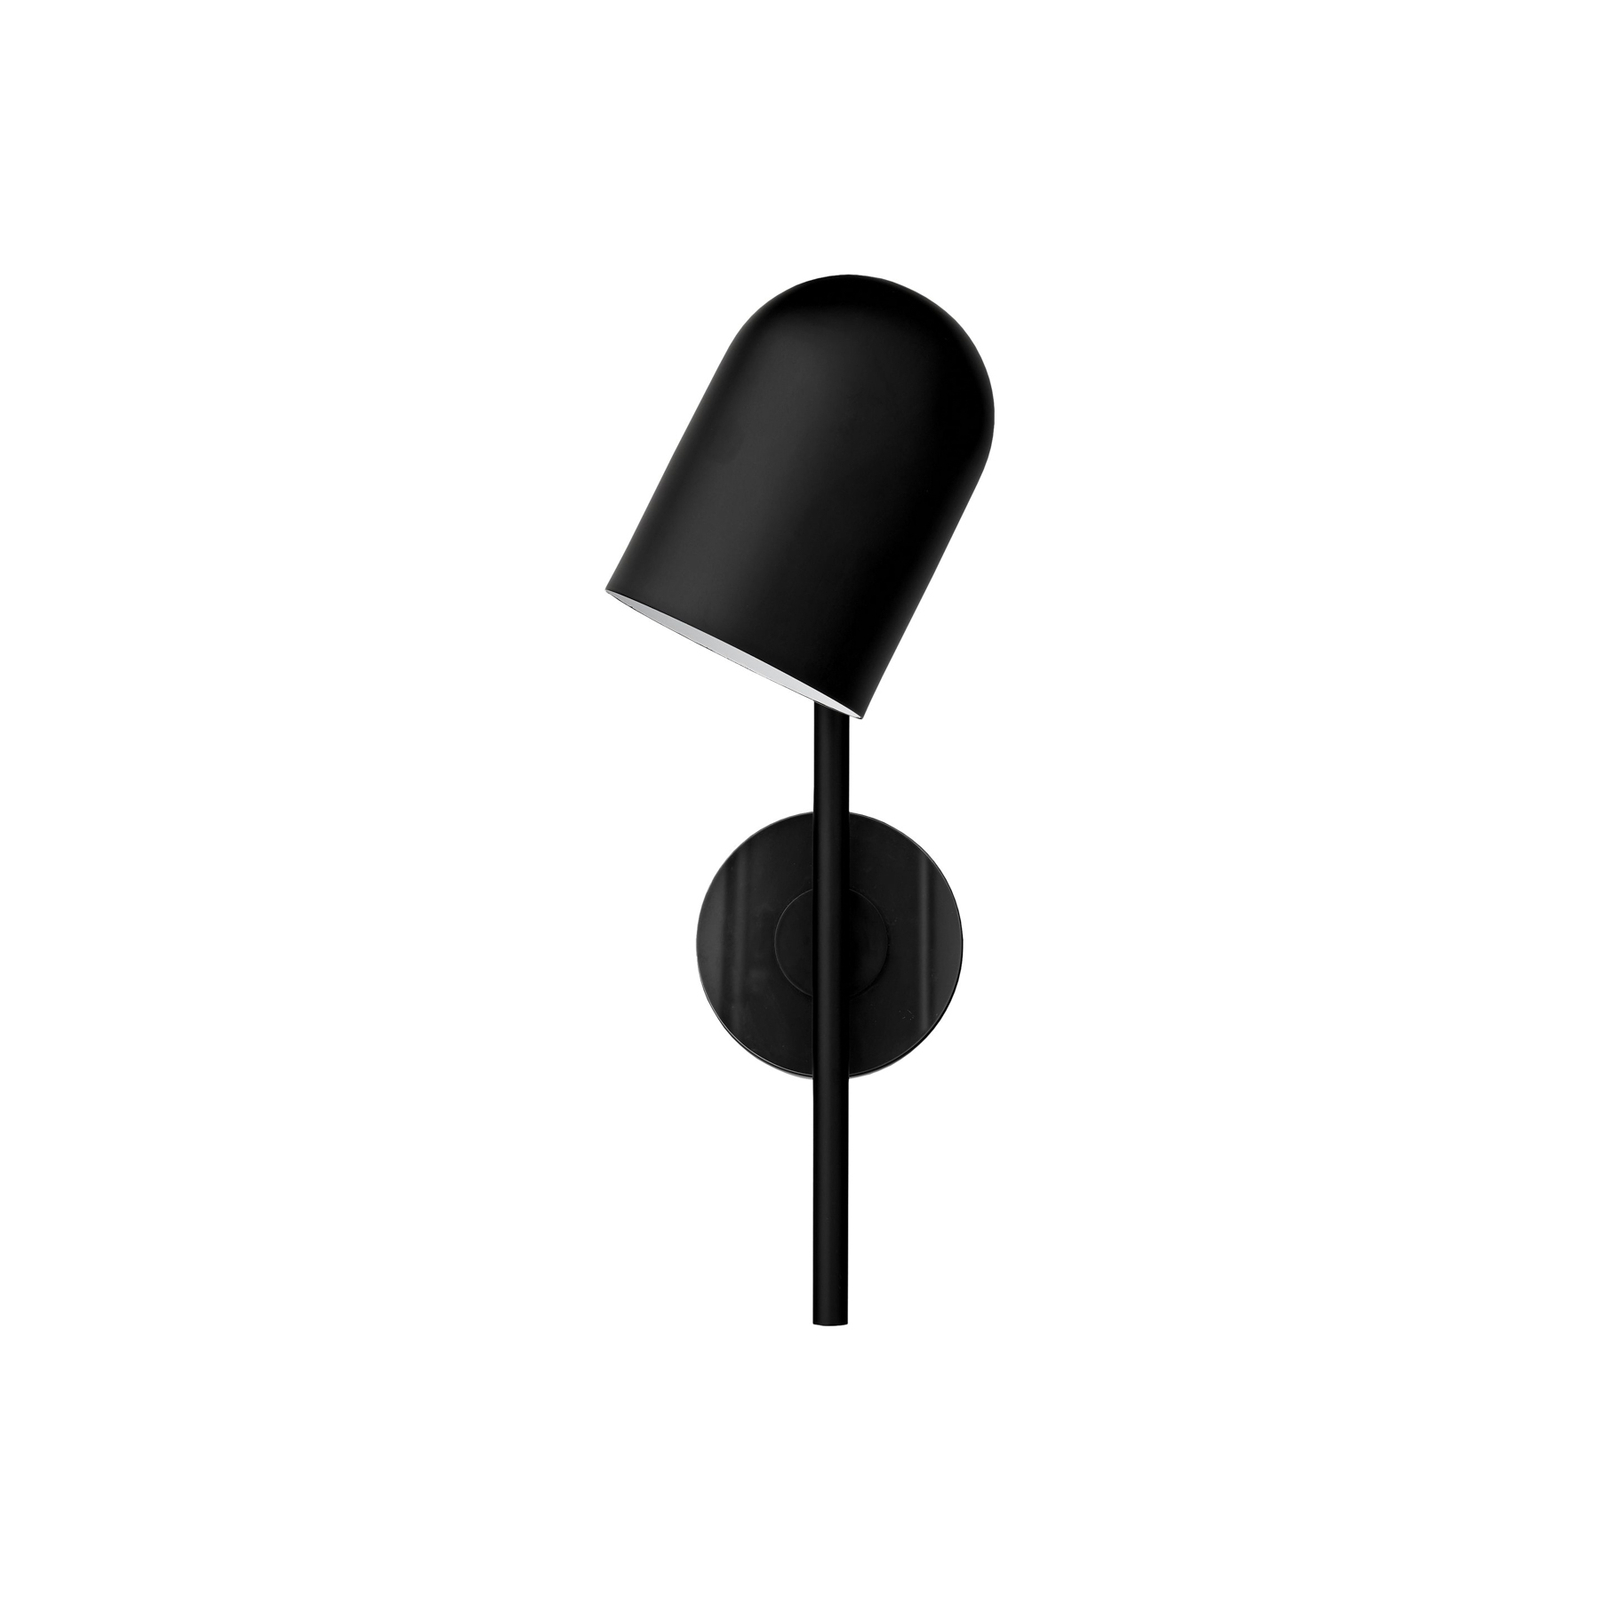 AYTM Luceo wall light, black, with plug